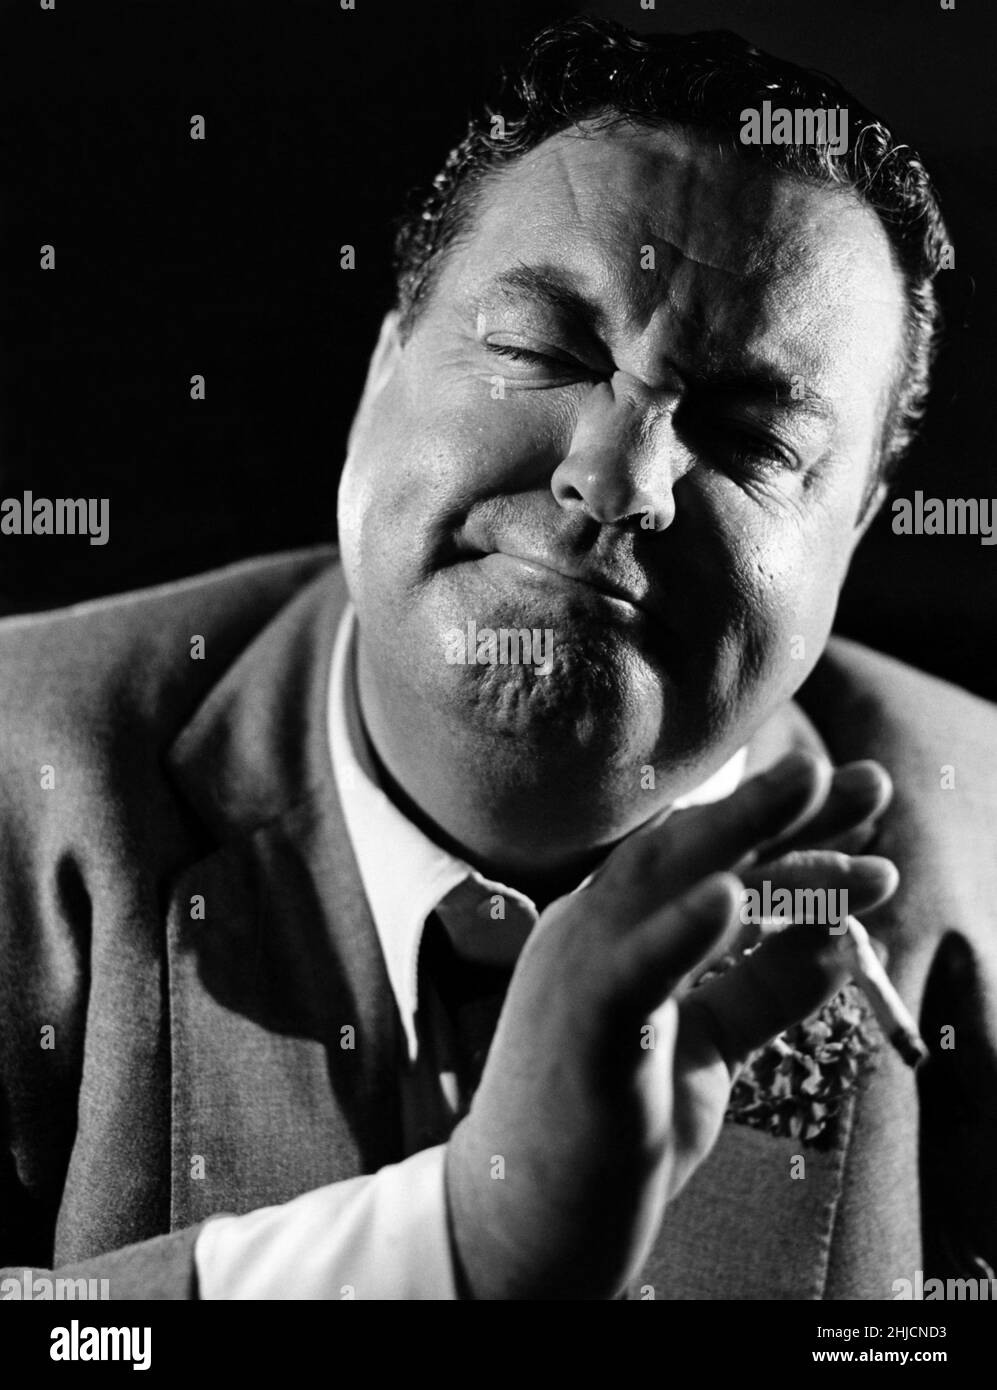 Jackie Gleason (1916-1987), American comedian and actor, whose hit TV variety program, 'The Jackie Gleason Show,' was second only to 'I Love Lucy' in national ratings. He played bus driver Ralph Kramden on another hit TV show, 'The Honeymooners.' Stock Photo